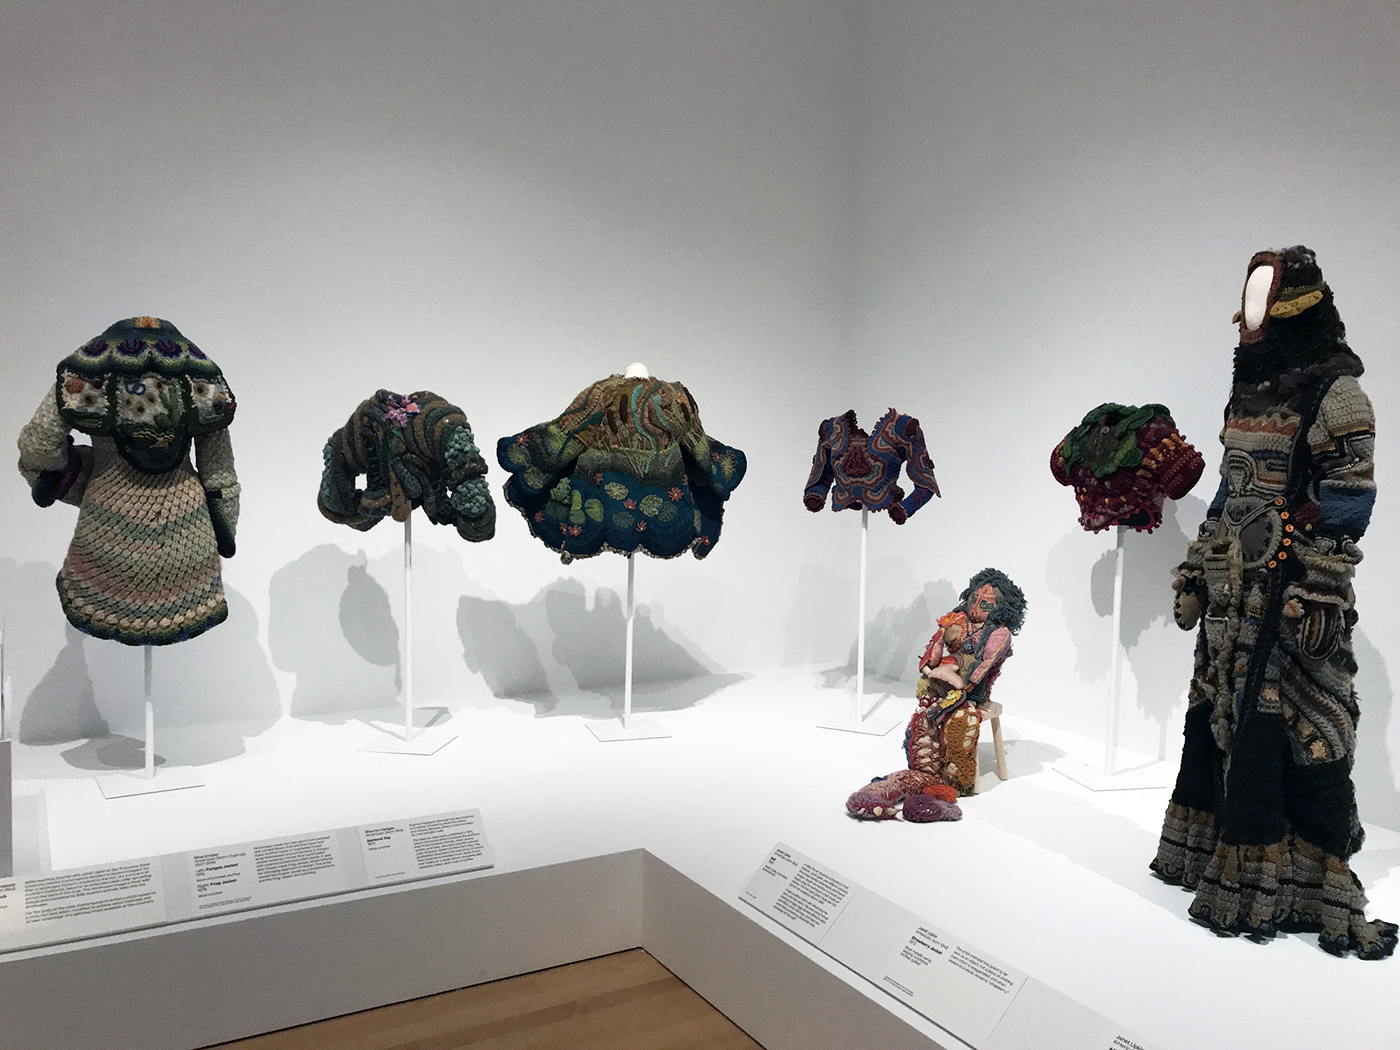 Installation view of Off the Wall: American Art to Wear at the Philadelphia Museum of Art, with work by Marika Contompasis, Dina Knapp, Sharron Hedges, and Janet Lipkin (courtesy Janet Lipkin)